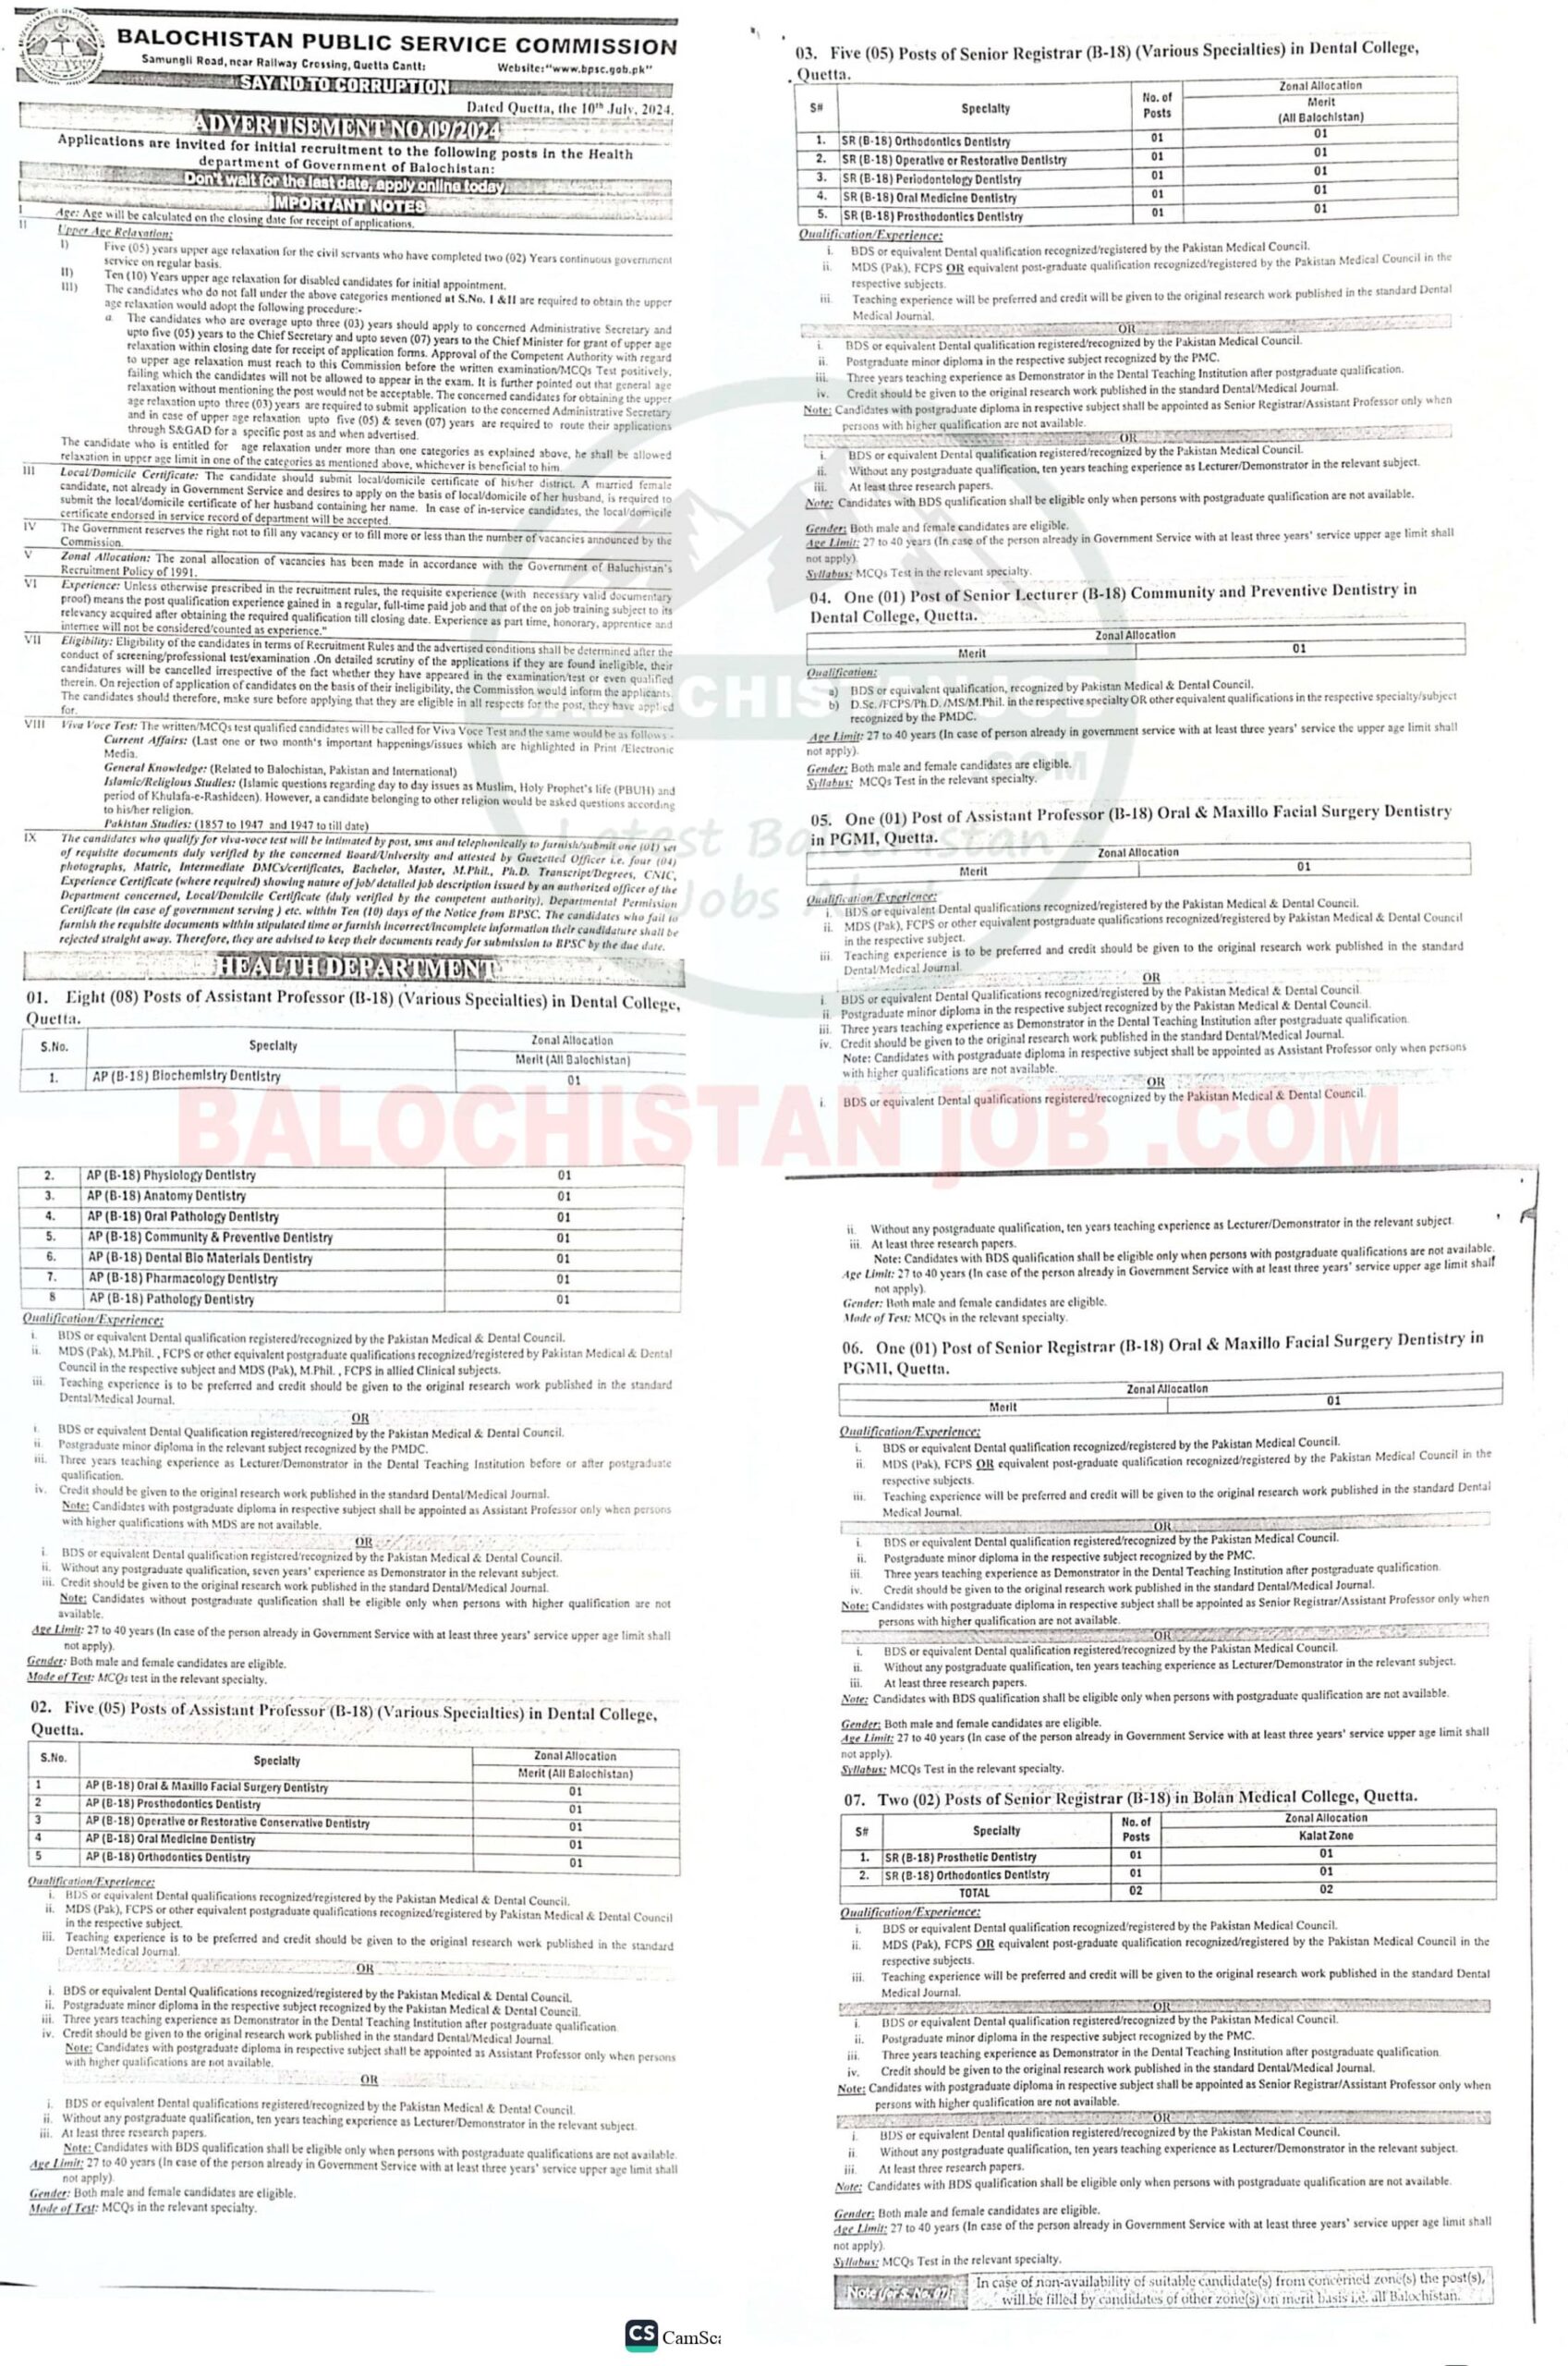 It is the Official Advertisement of BPSC Jobs Advertisement No 09/2024.